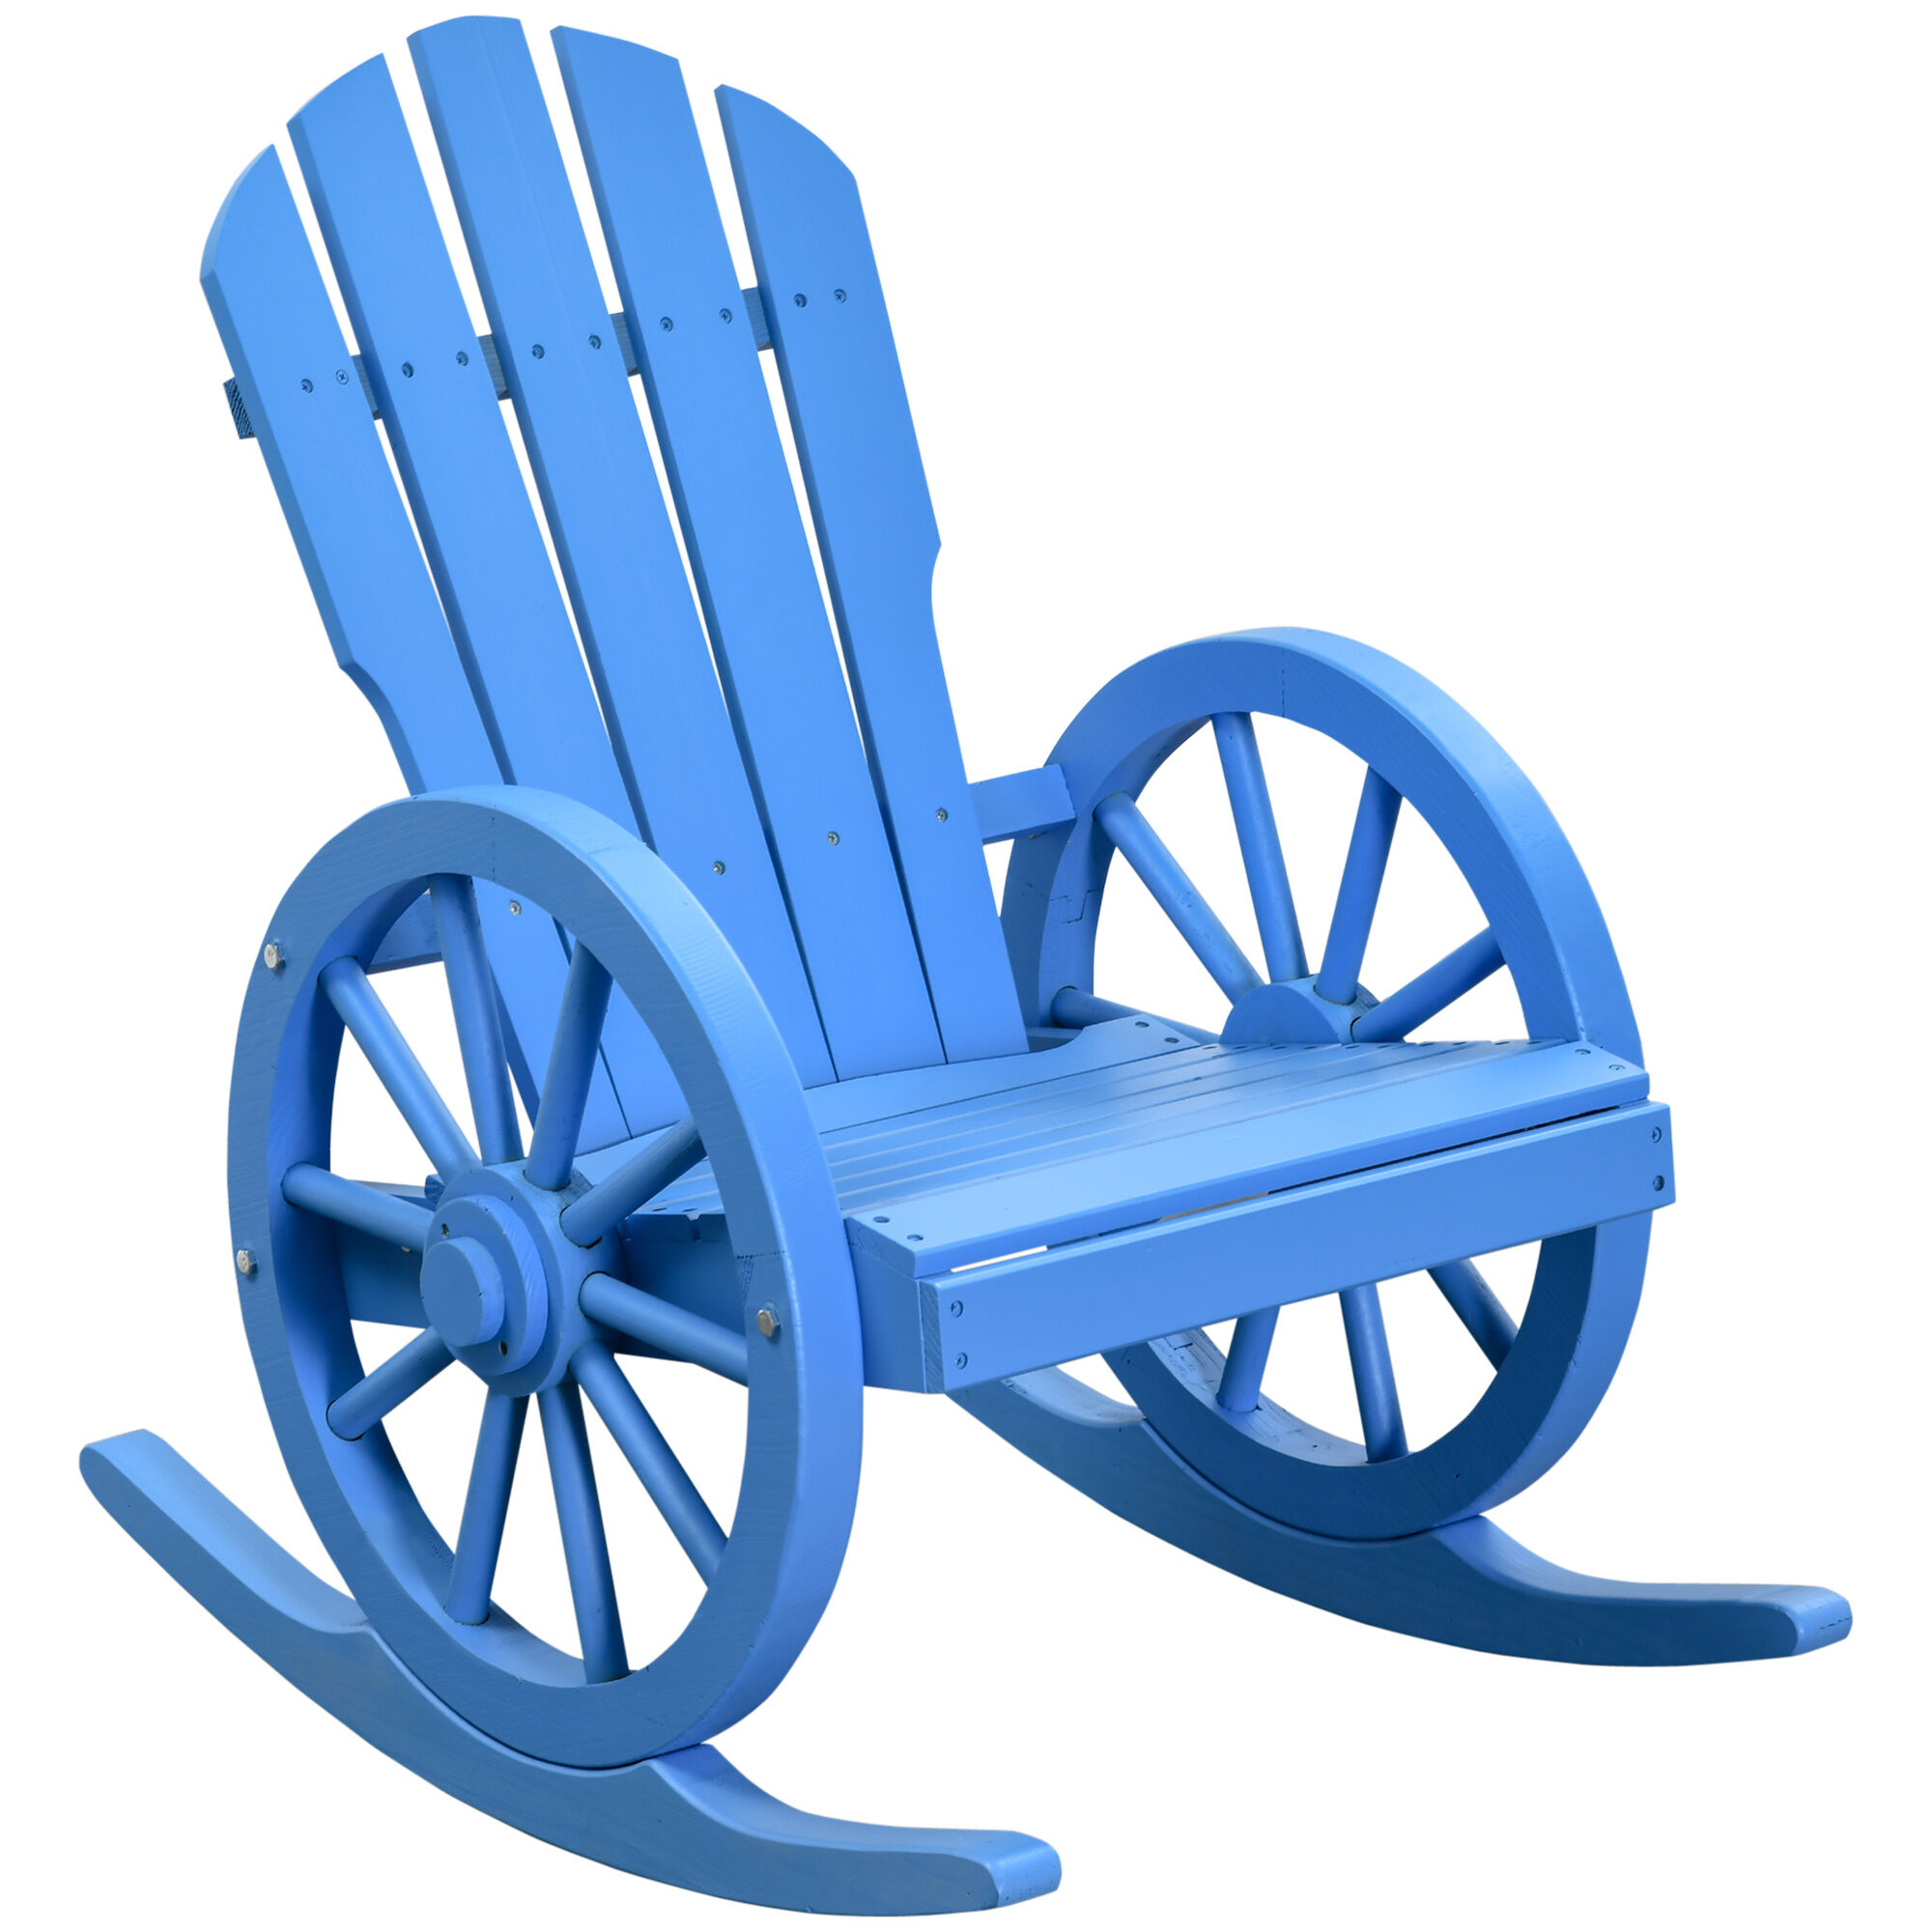 Outsunny Adirondack Rocking Chair with Slatted Design and Oversize Back for Porch, Poolside, or Garden Lounging, Blue